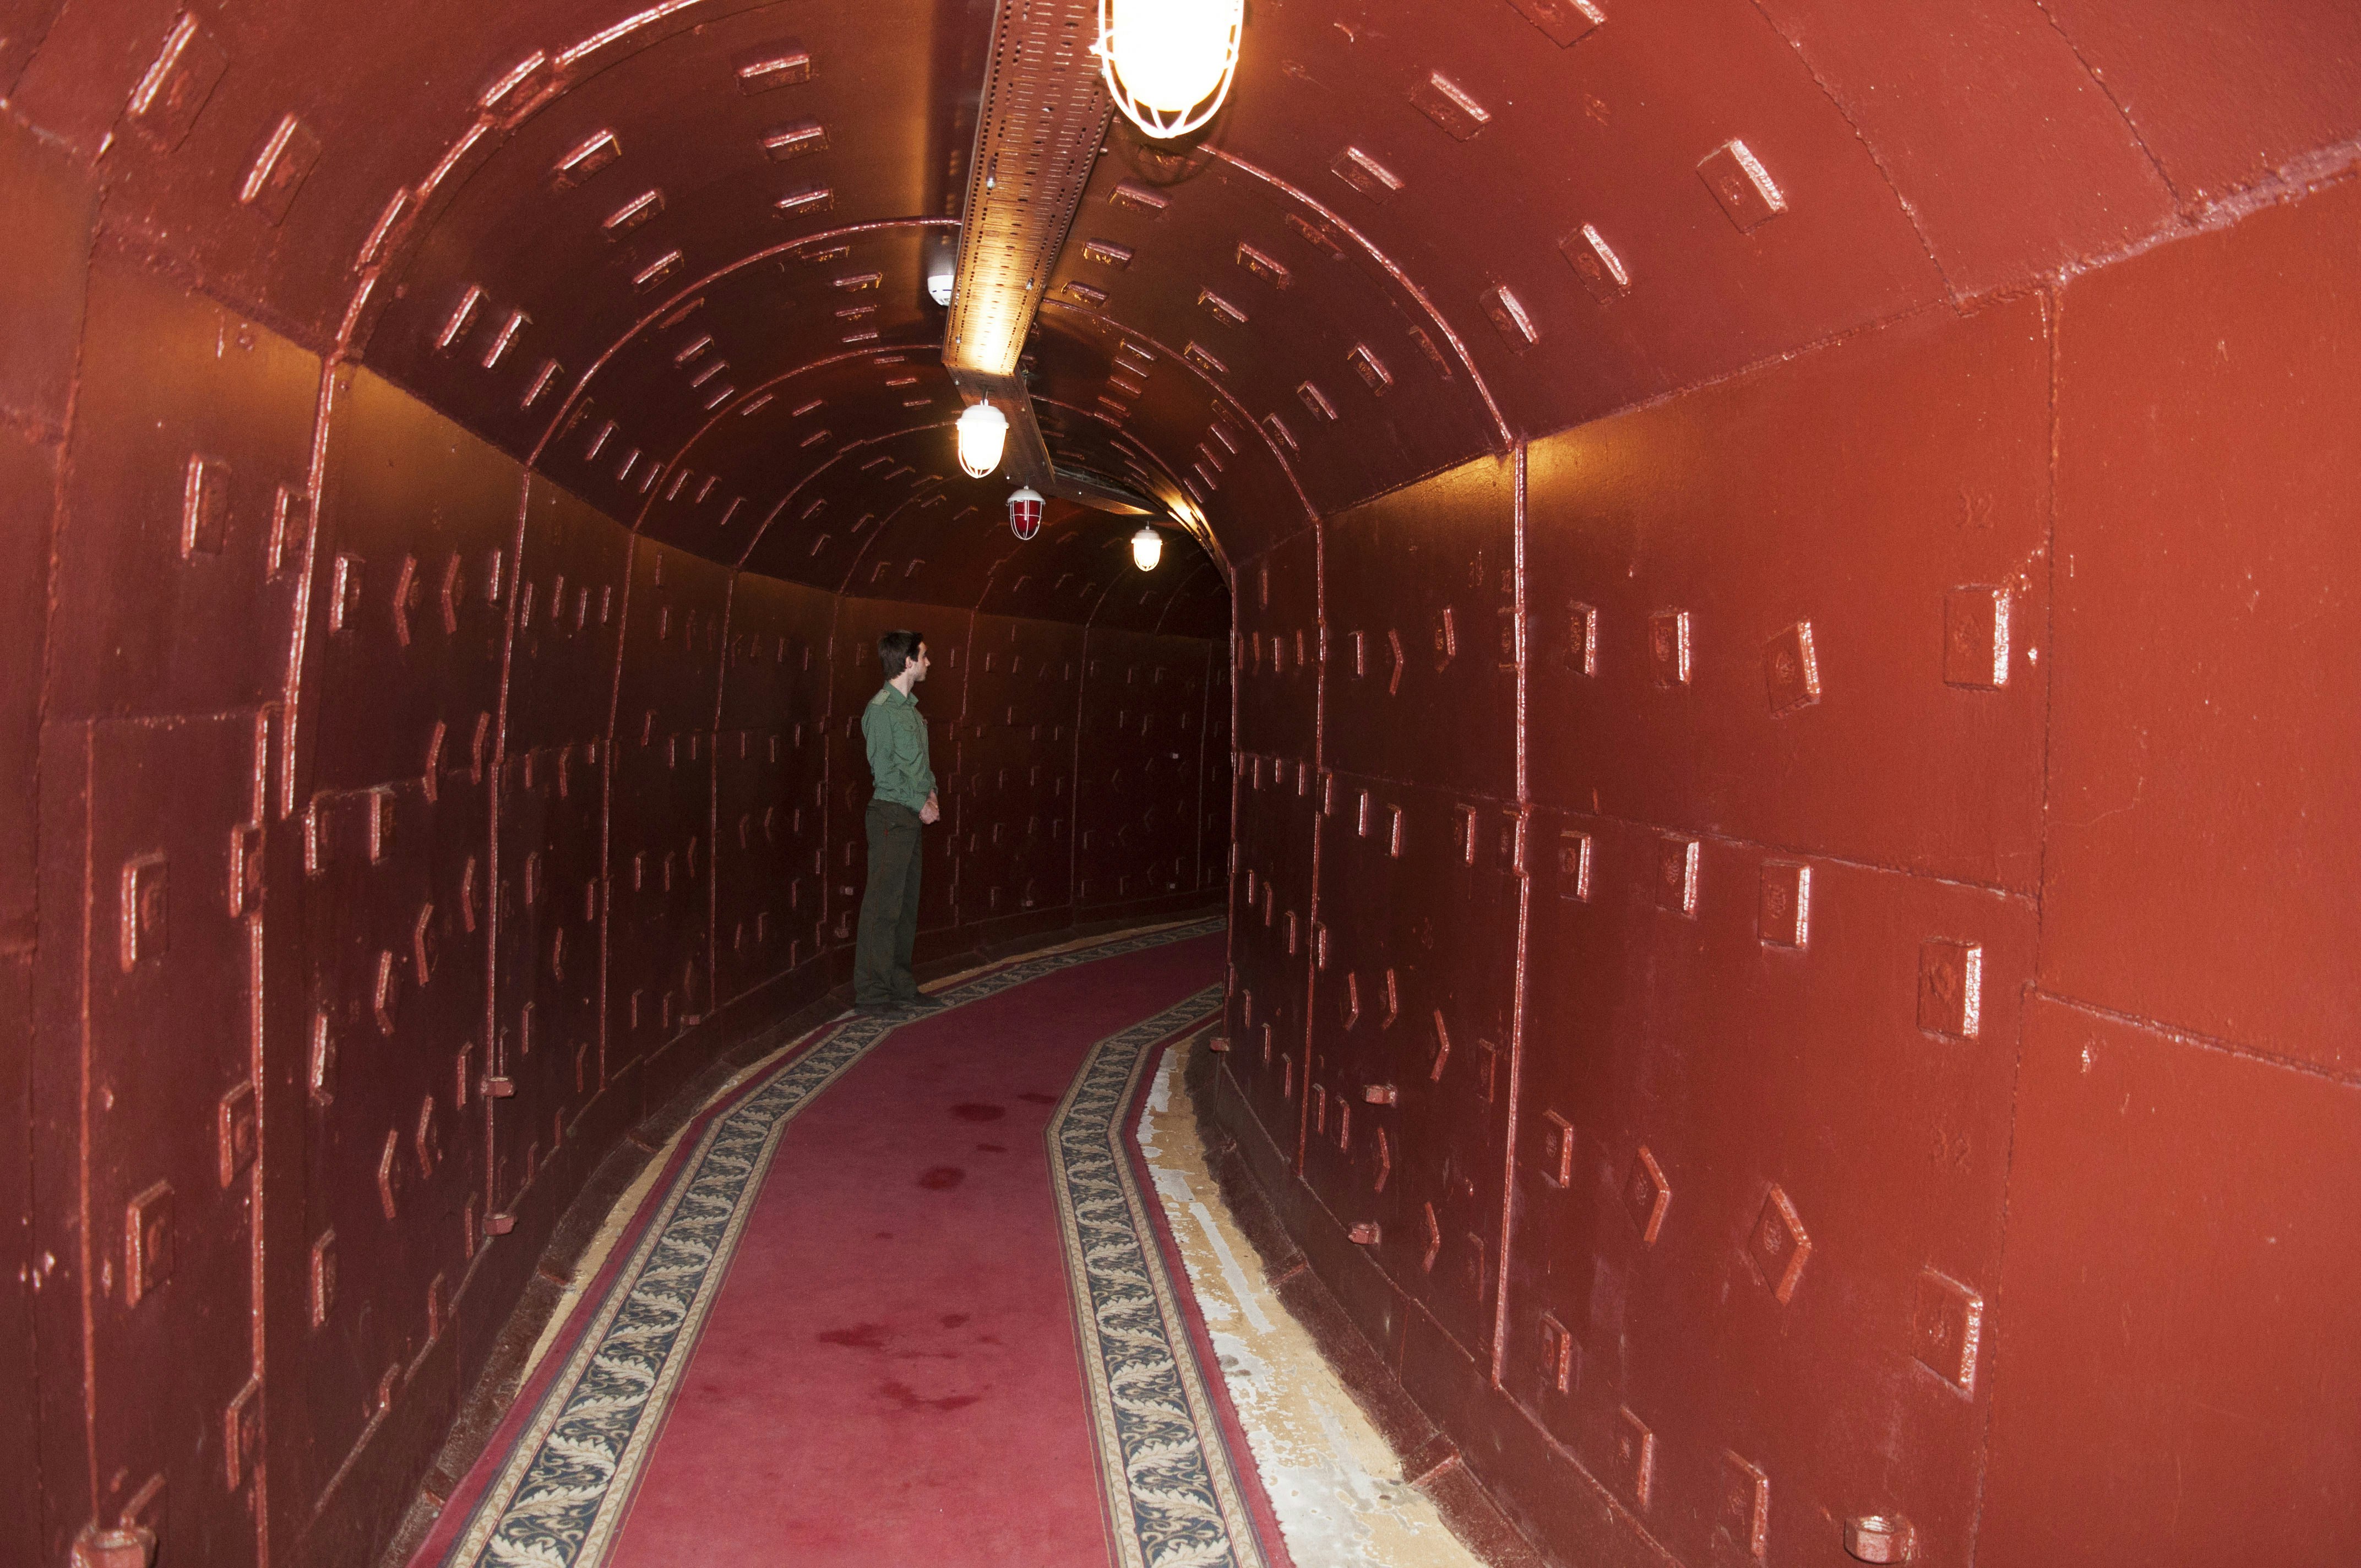 An underground tunnel lined with reddish-brown walls curves round a corner. A guide stands towards the bend.